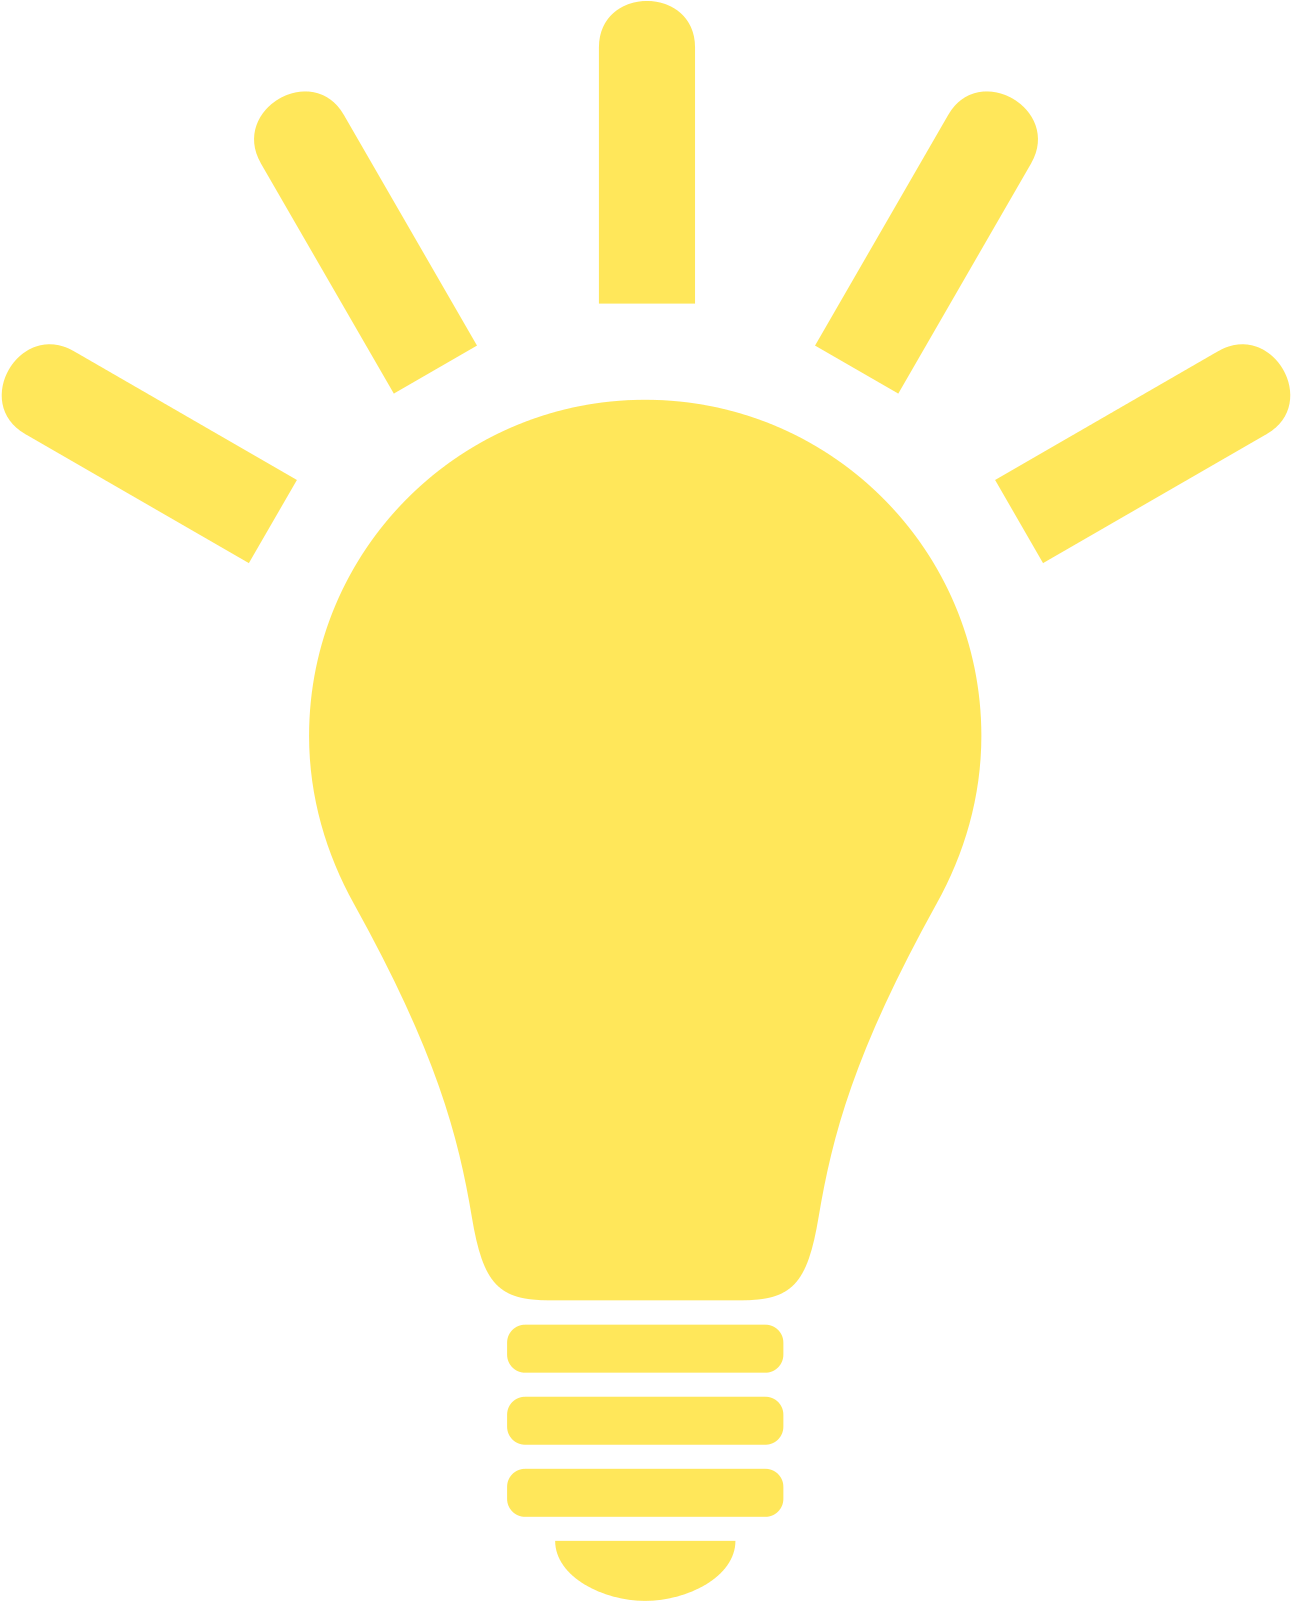 light bulb icon png